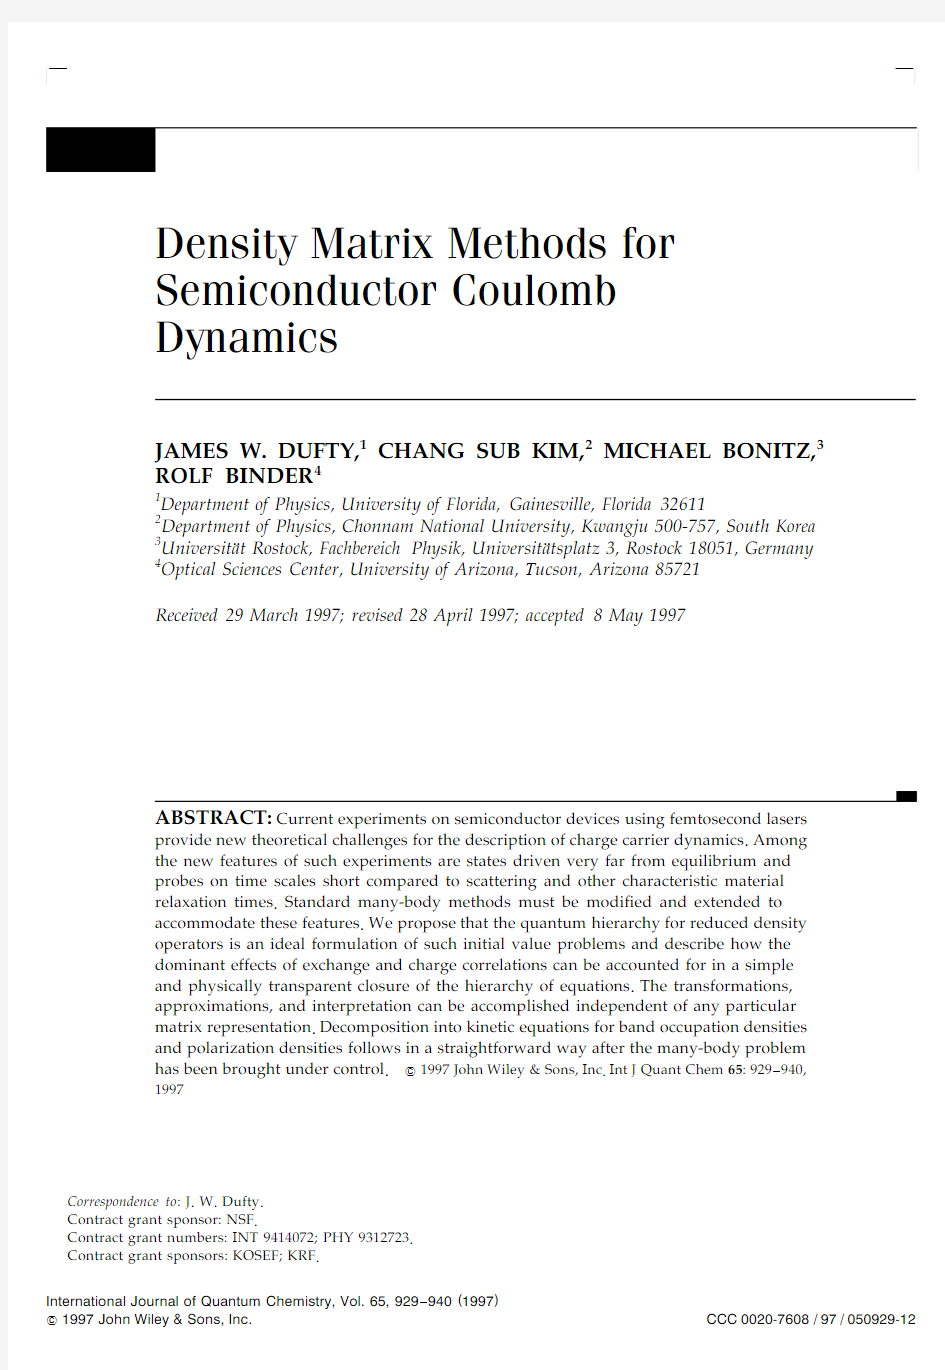 Density Matrix Methods for Semiconductor Coulomb Dynamics